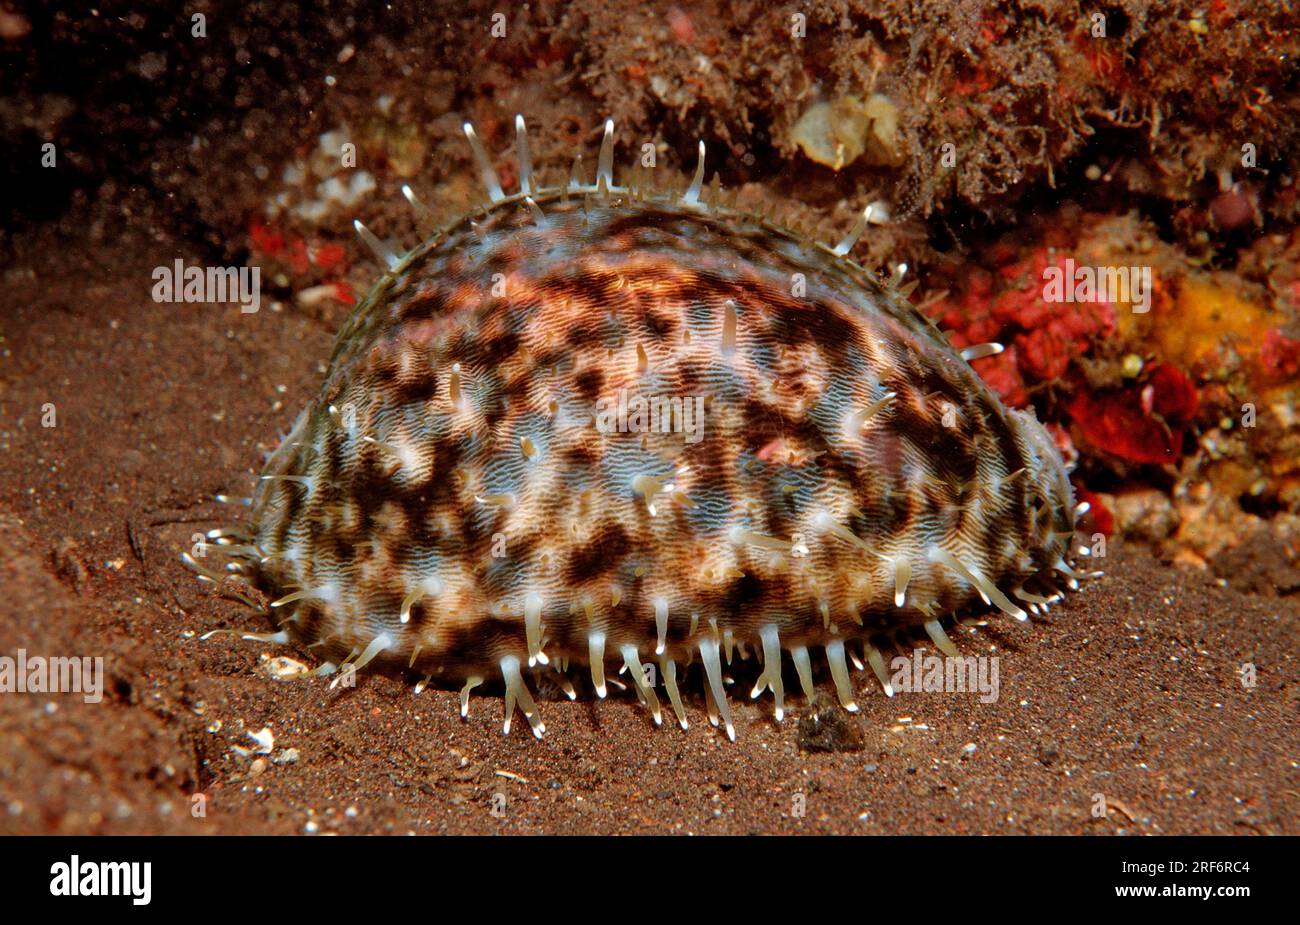 Tiger cowrie, Bali (Cypraea tigris), tiger shell, cowrie shell, leopard cowrie, Indonesia Stock Photo